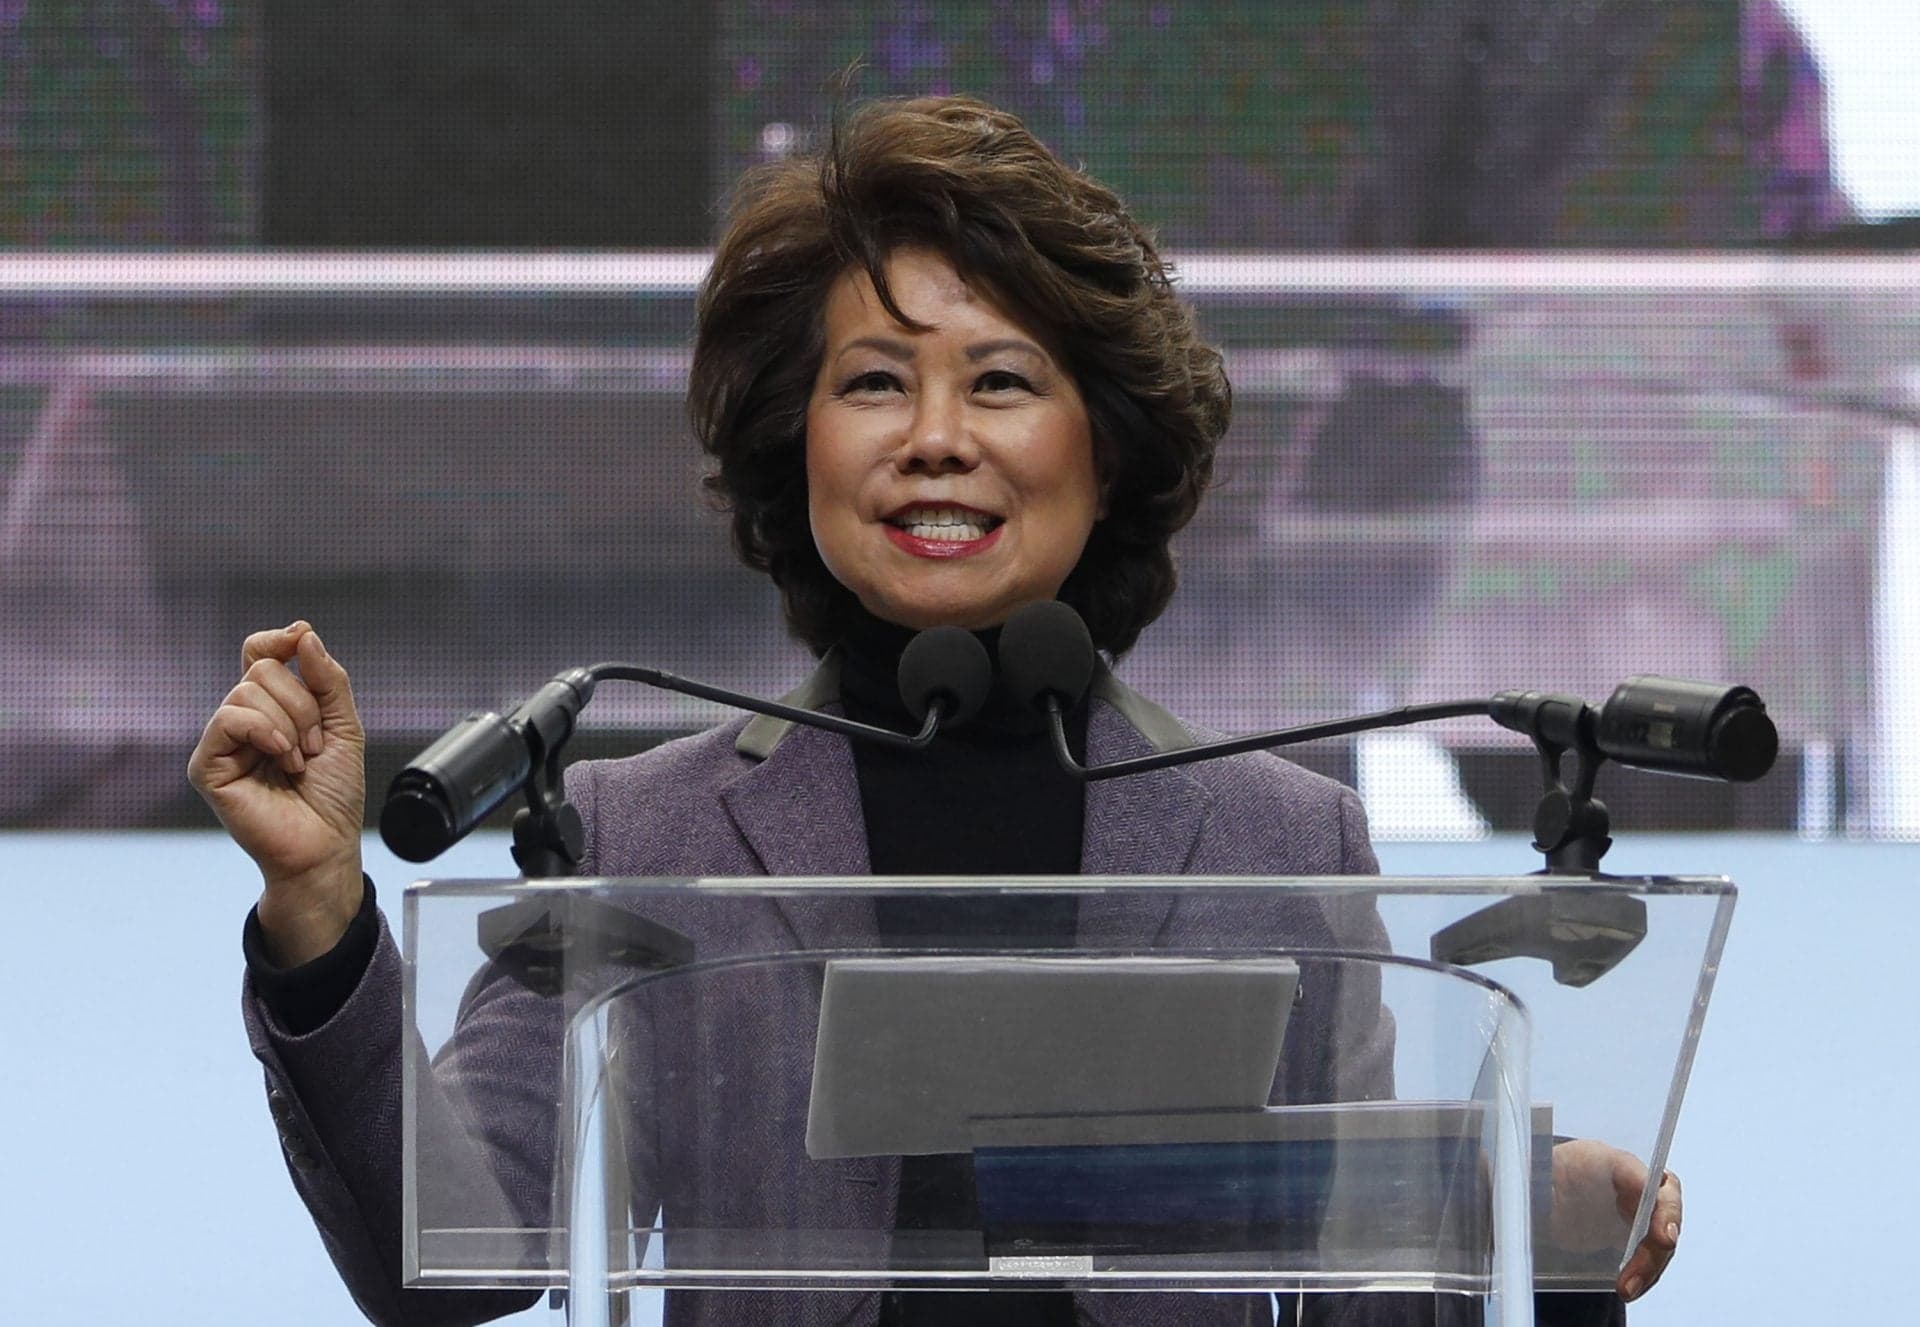 Elaine Chao Says Deregulation Should Smooth the Way for Autonomous Vehicles